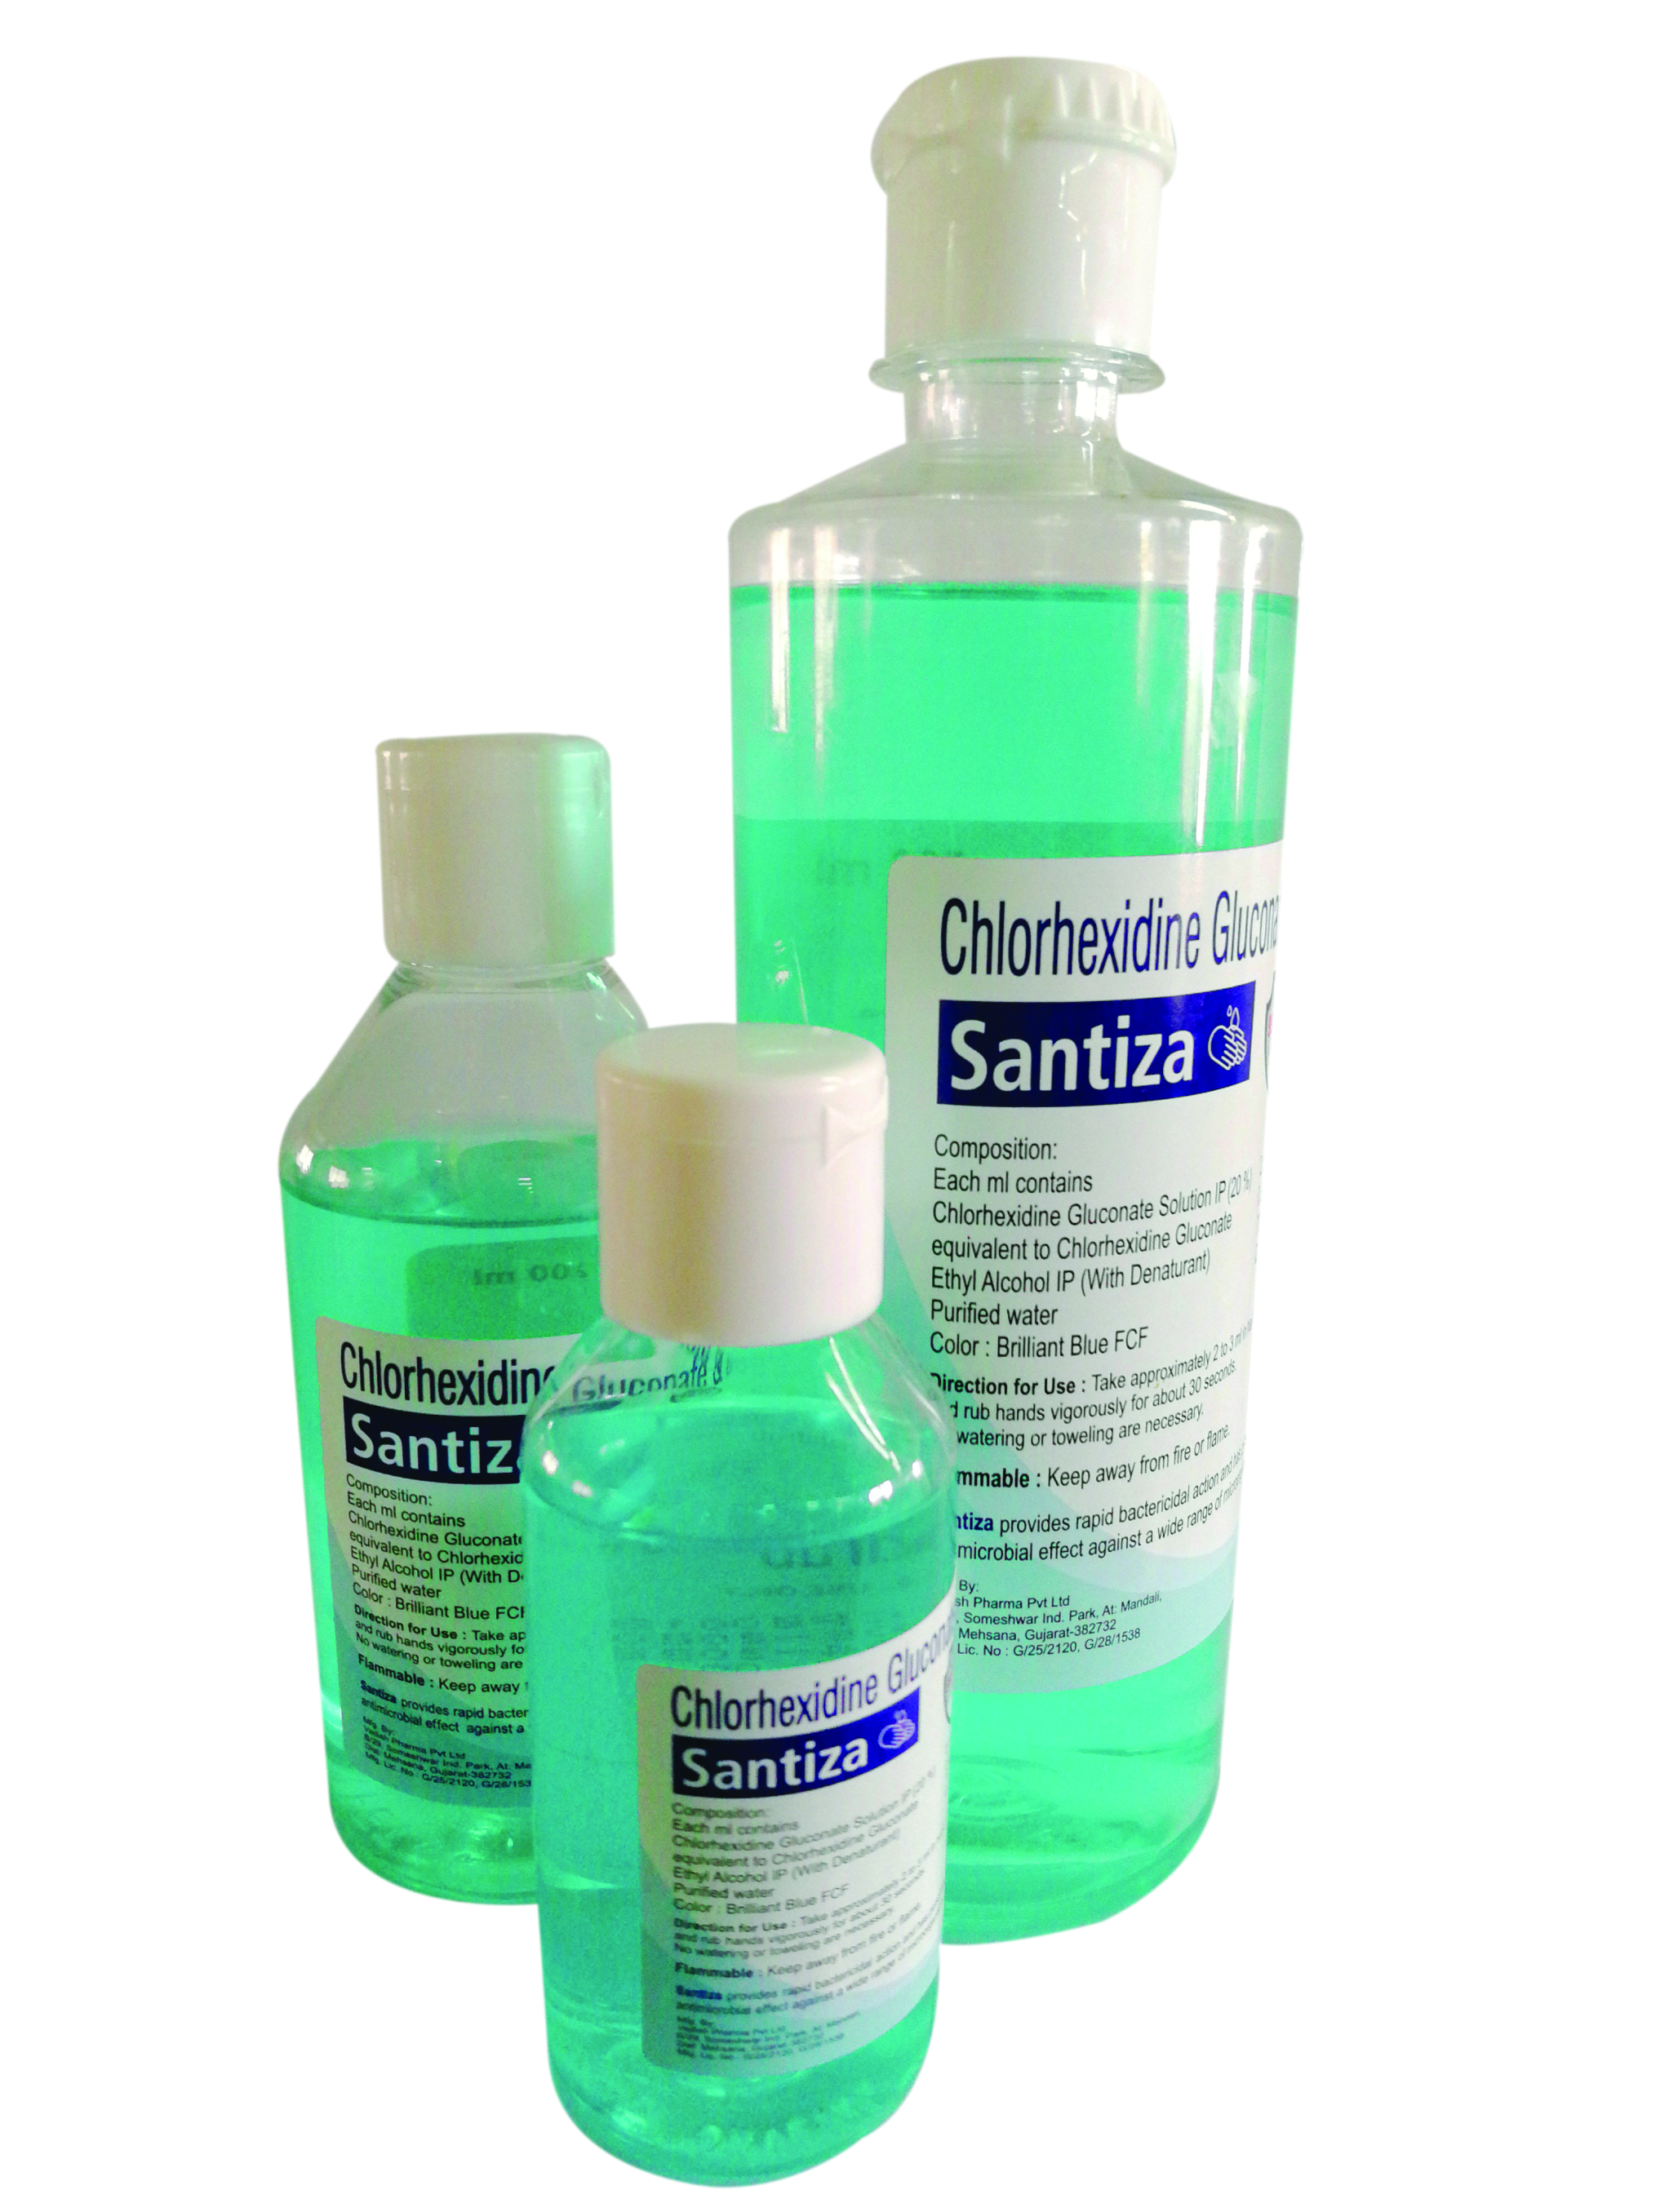 In an effort to support hygiene and safe health Cadila Pharma launches a range of hand sanitizers